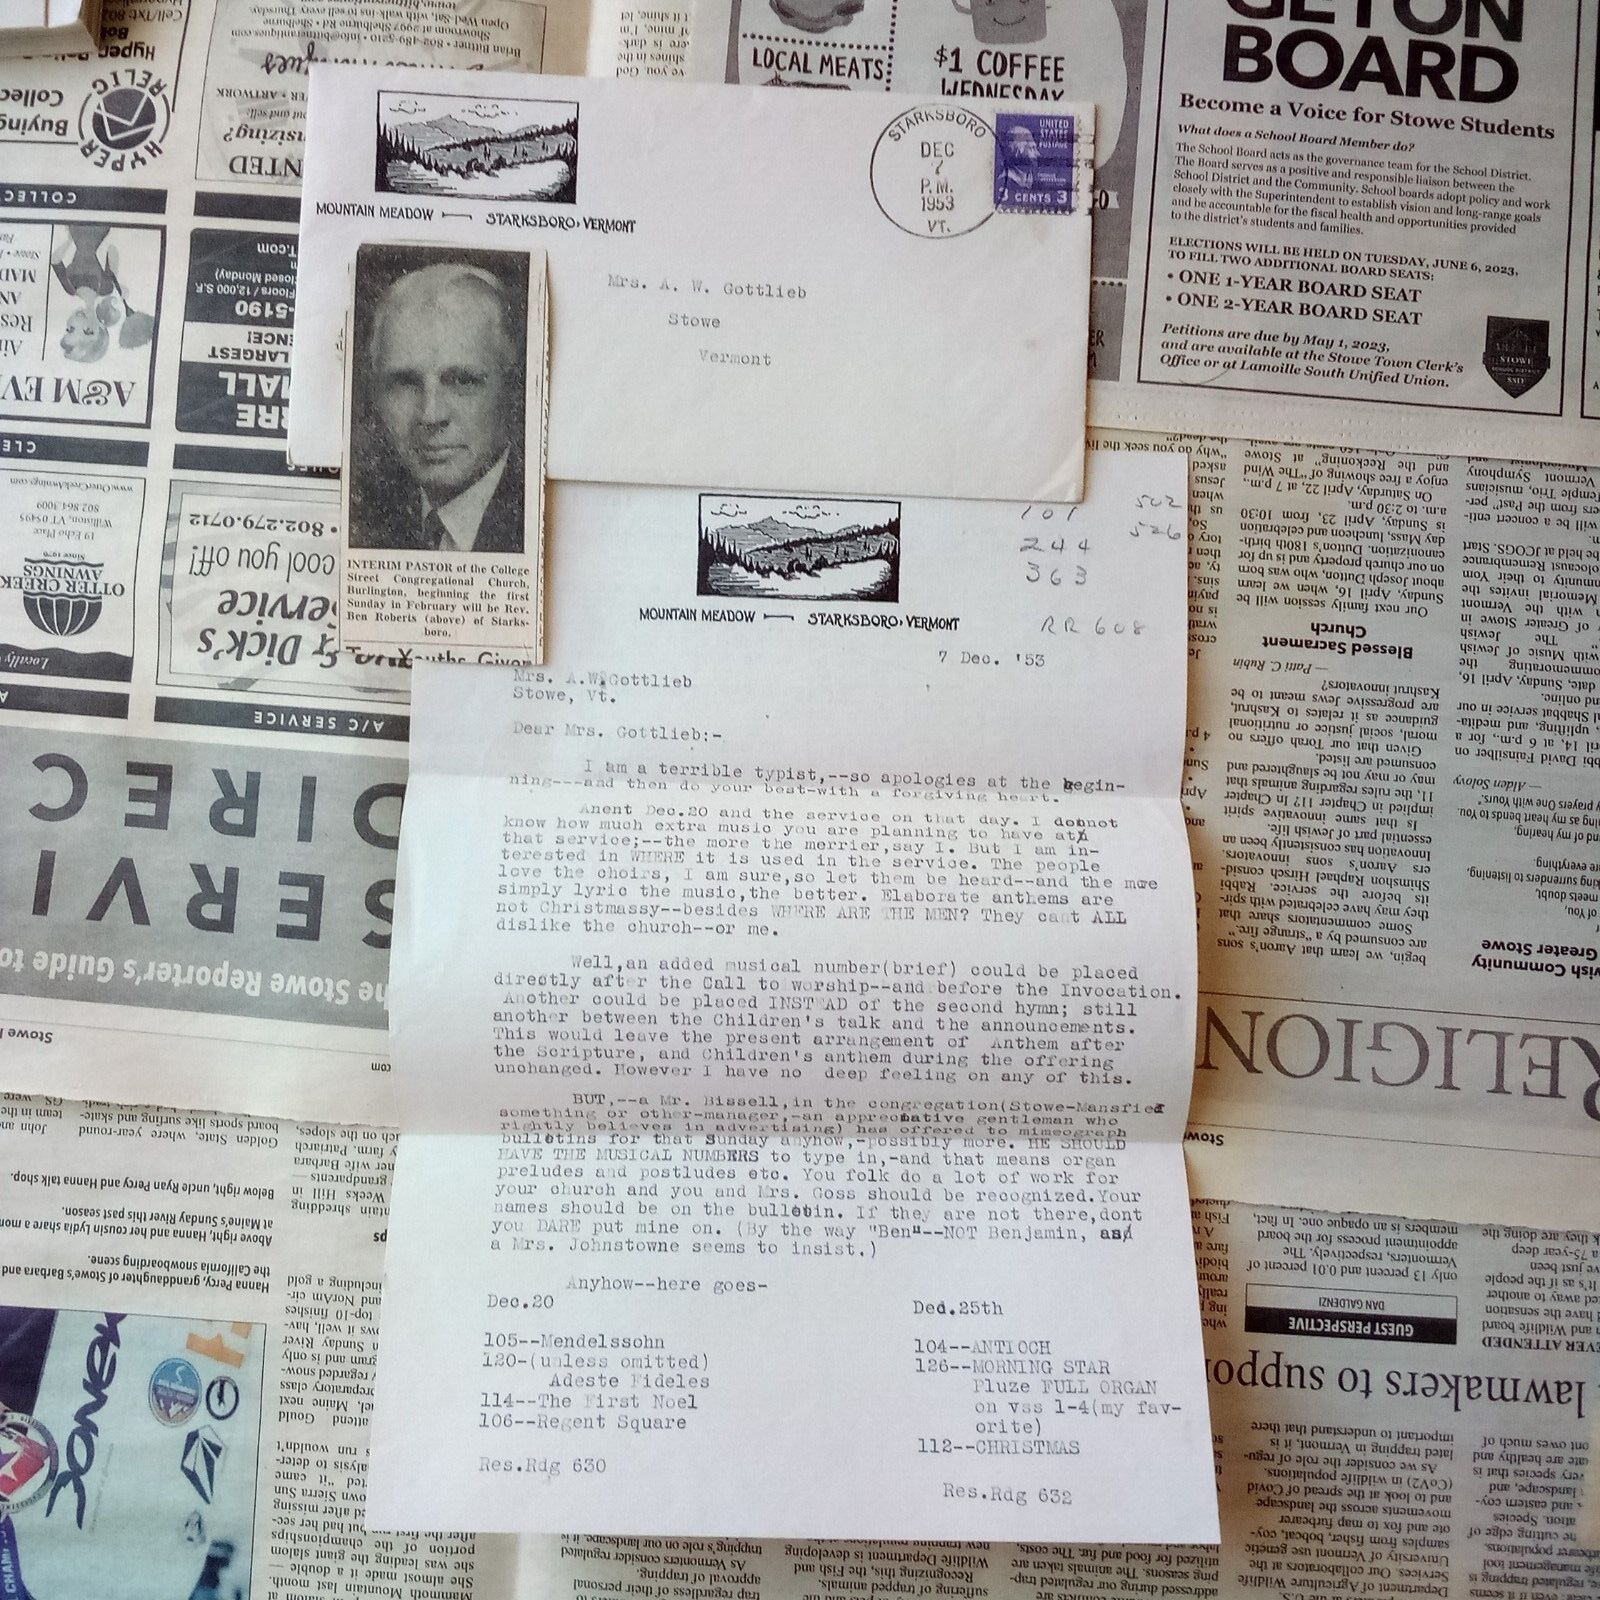 1953 - Mountain Meadow - Starksboro Vermont Letter + Newspaper Clipping